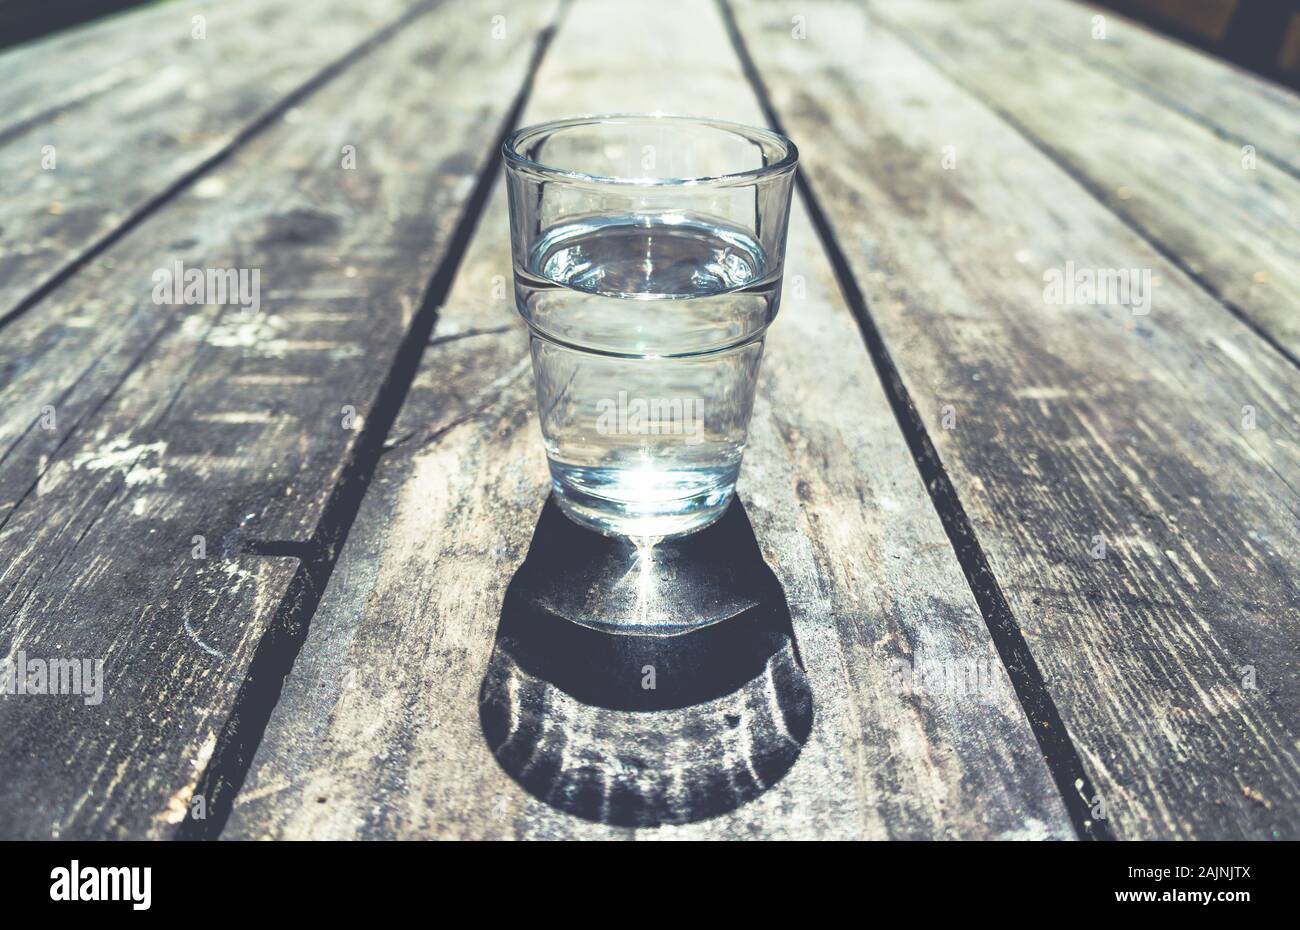 Close-up of one glass of clear water standing in middle of rough wooden table Stock Photo